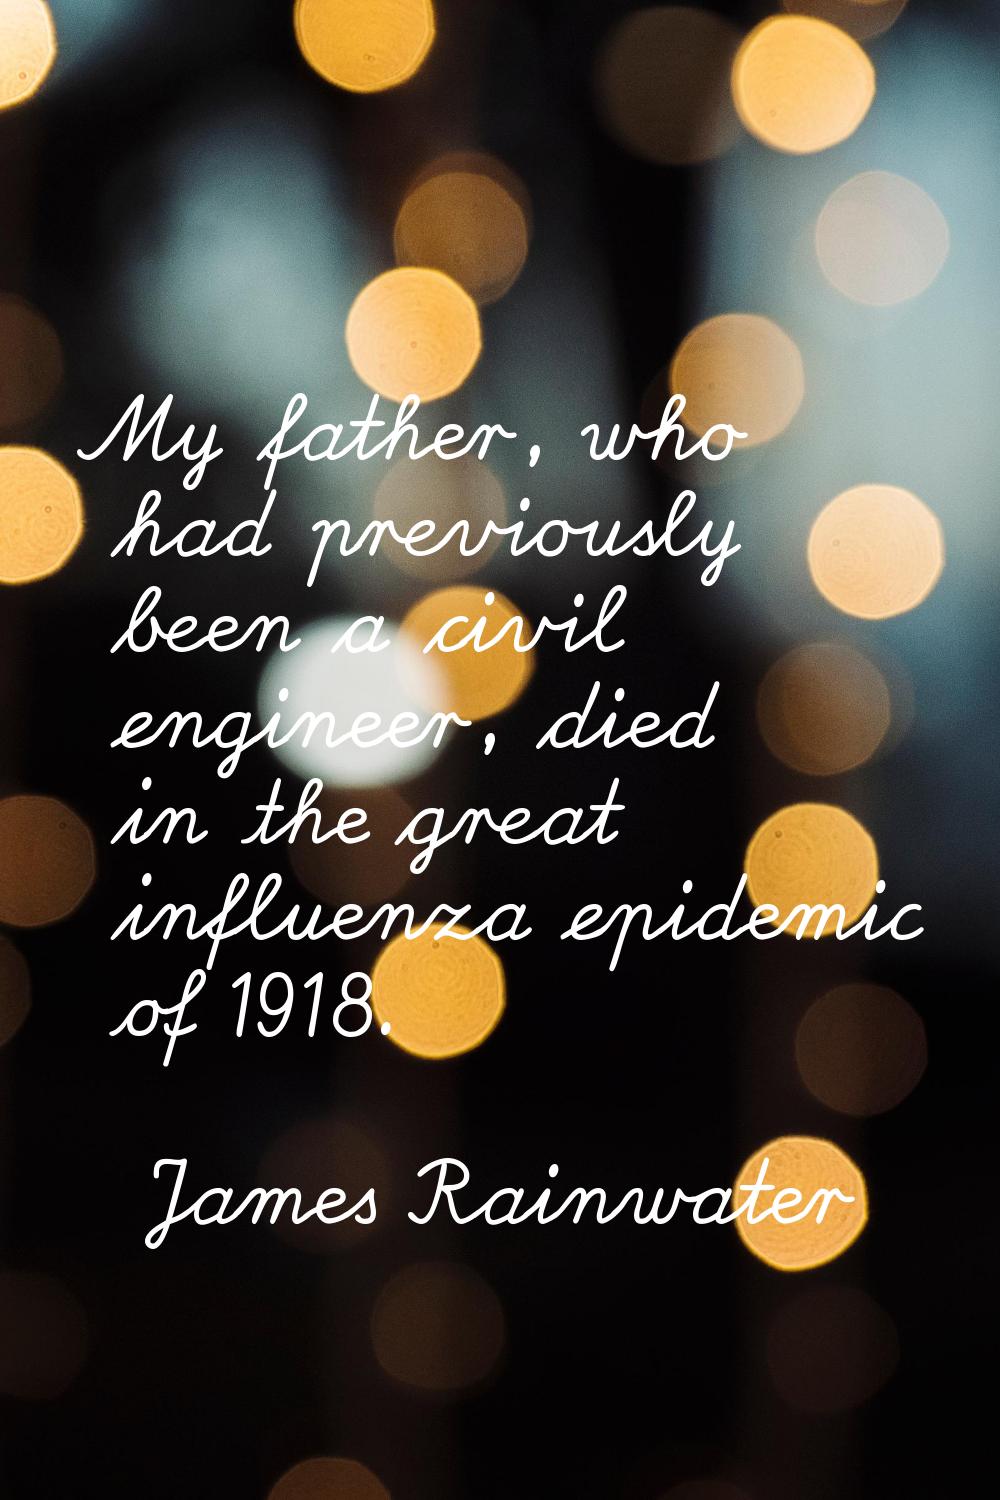 My father, who had previously been a civil engineer, died in the great influenza epidemic of 1918.